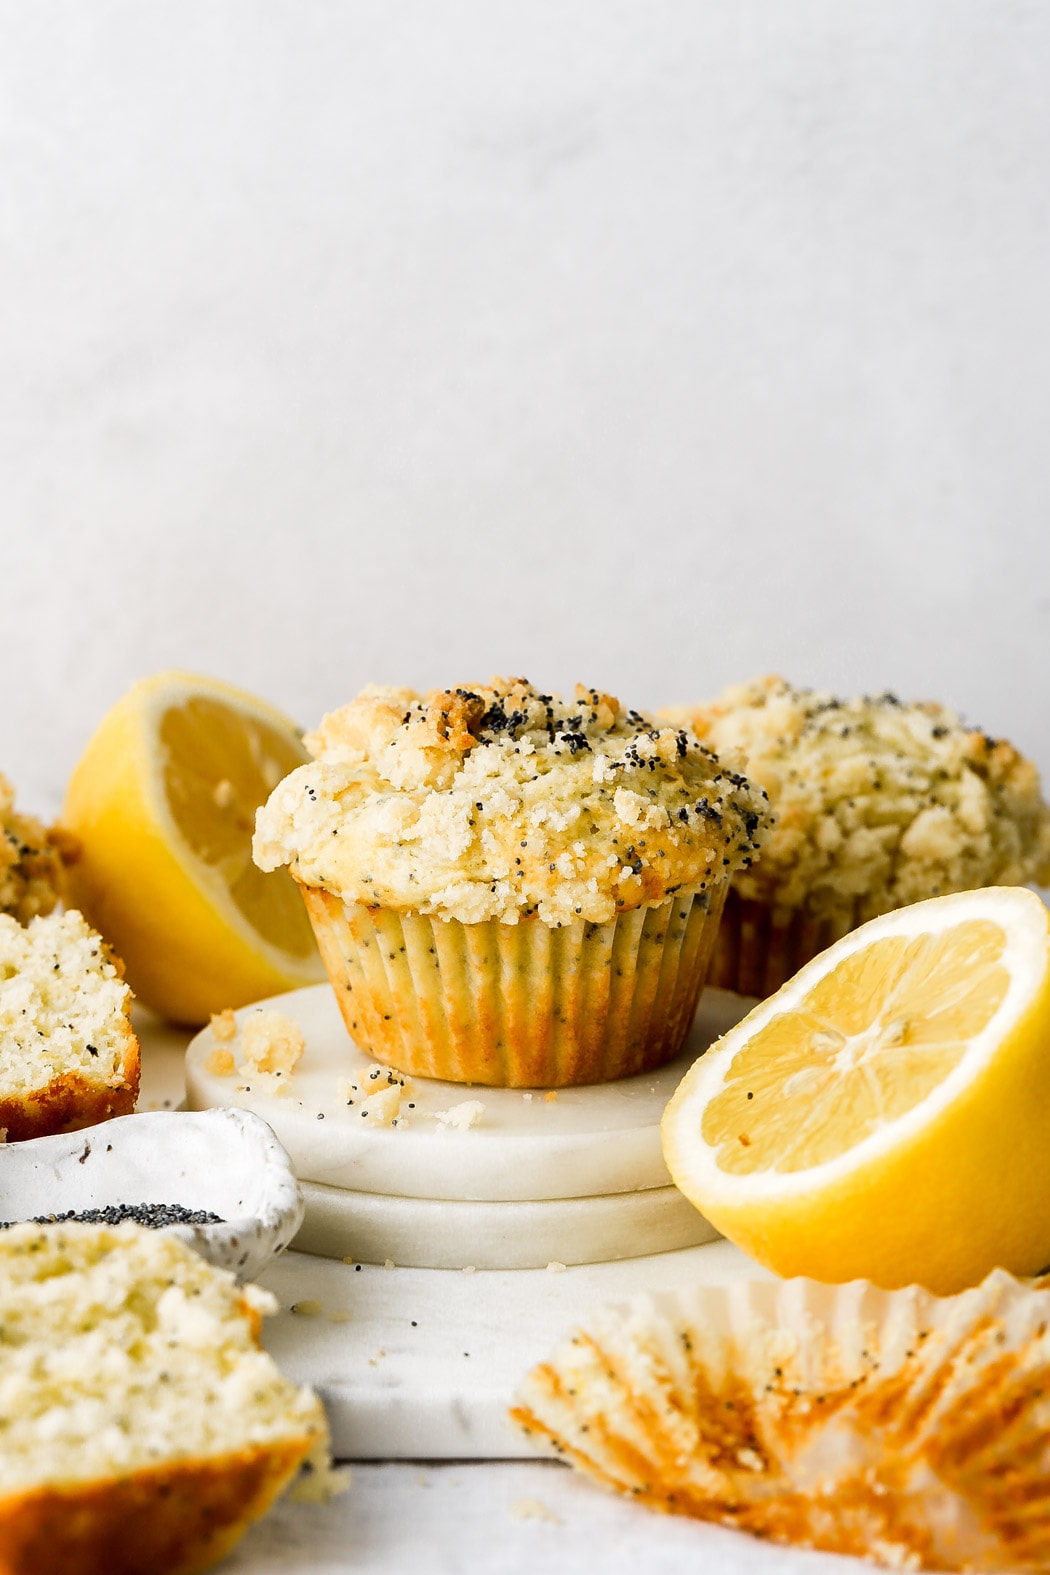 lemon poppy seed muffin with streusel and no glaze